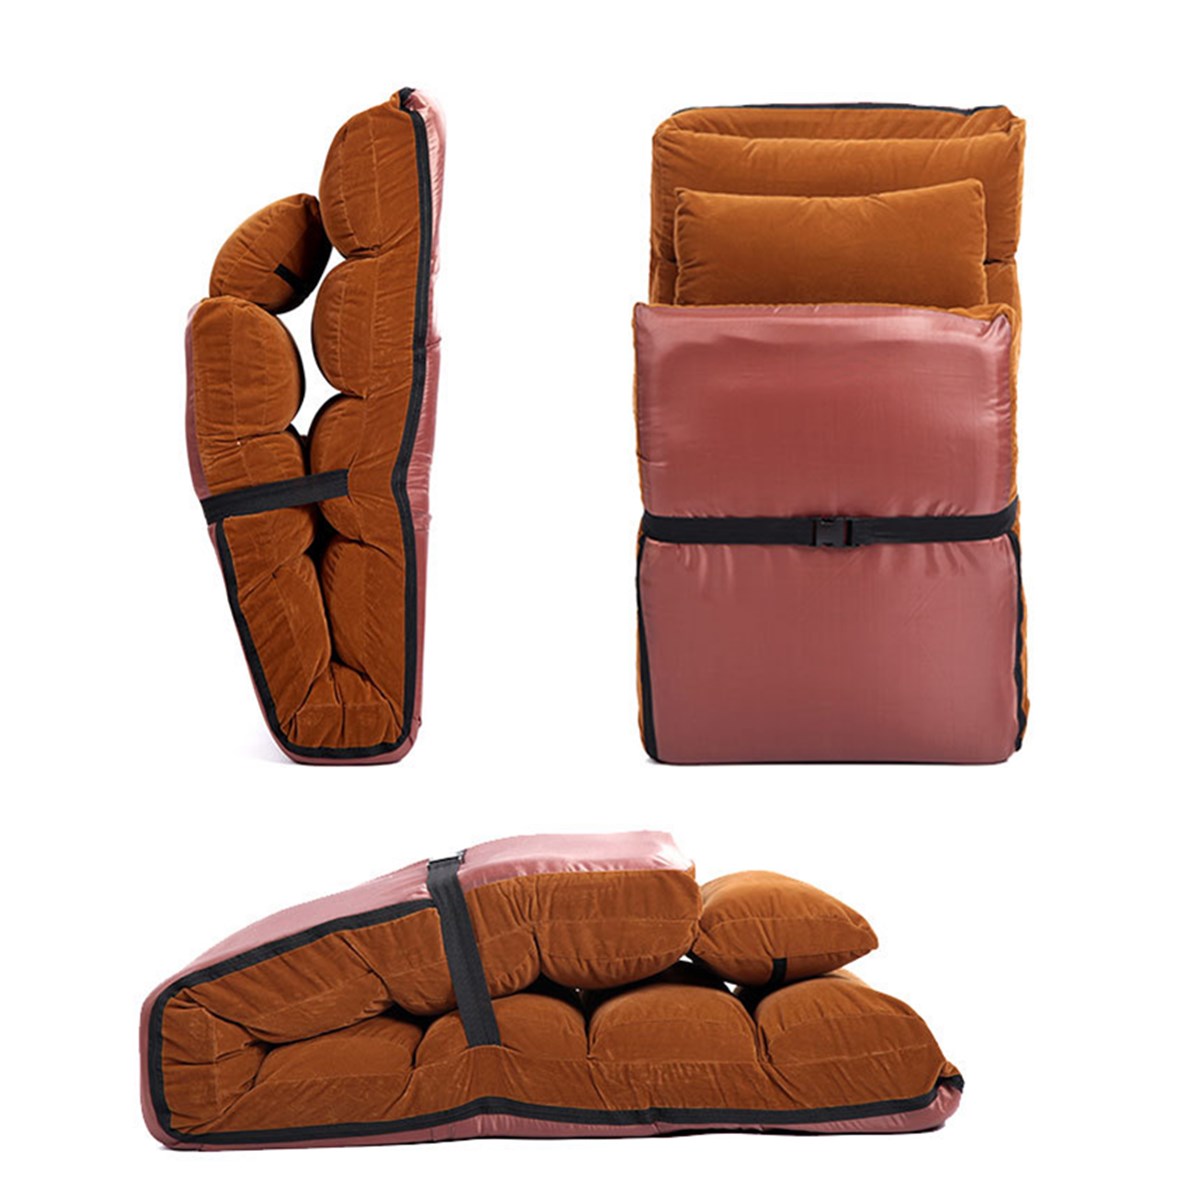 205CM-3-Folding-Lazy-Sofa-Chair-Portable-Stylish-Couch-Bed-Lounge-with-Pillow-Back-Support-1411009